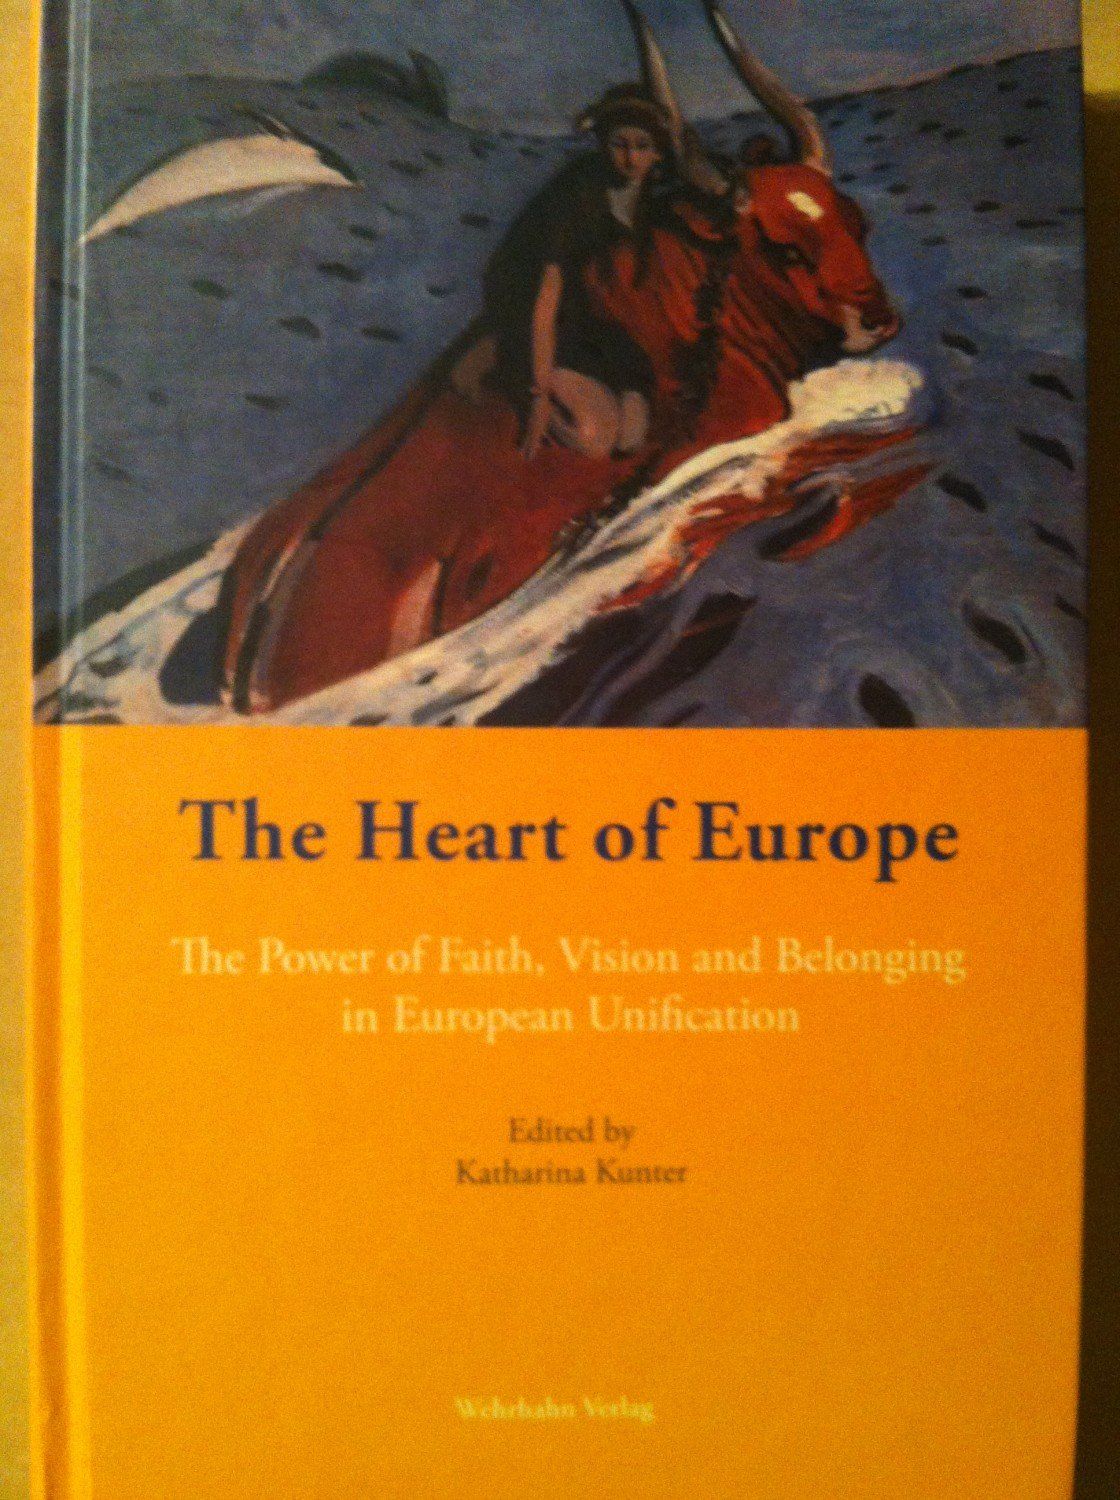 The Heart of Europe - The Power of Faith, Vision and Belonging in European Unification - Kunter, Katharina